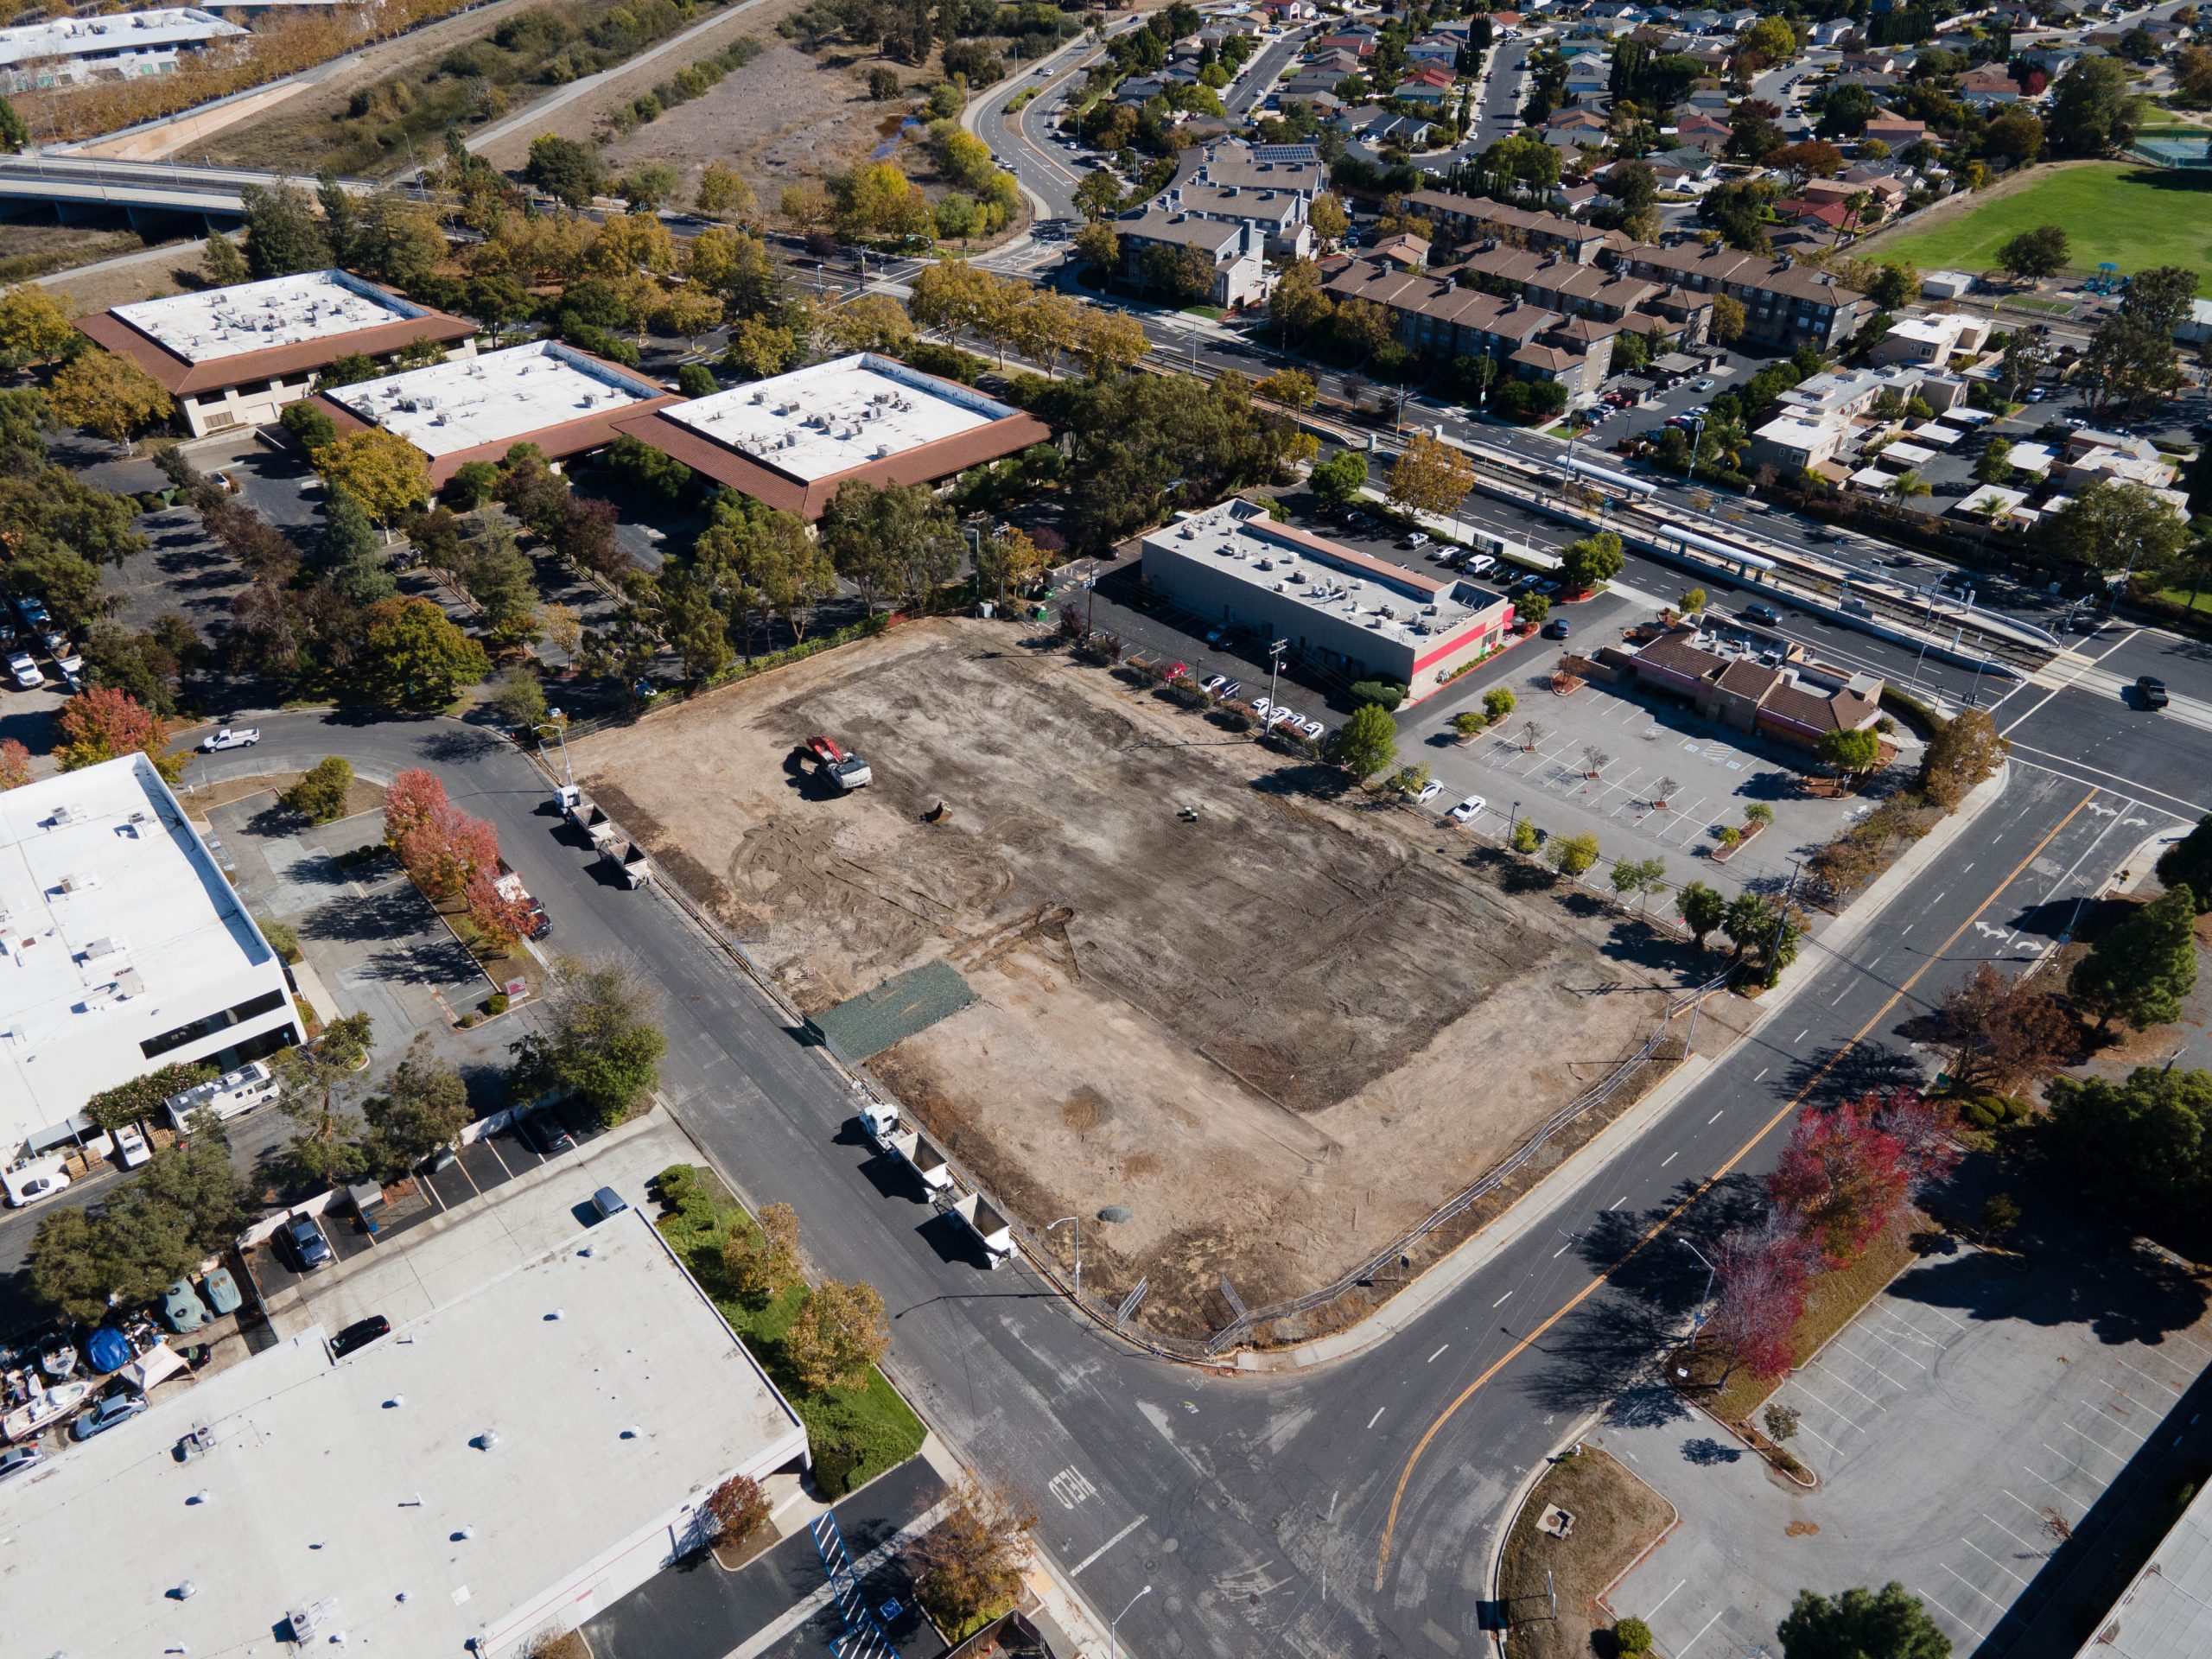 5123 Calle Del Sol construction site partially cleared